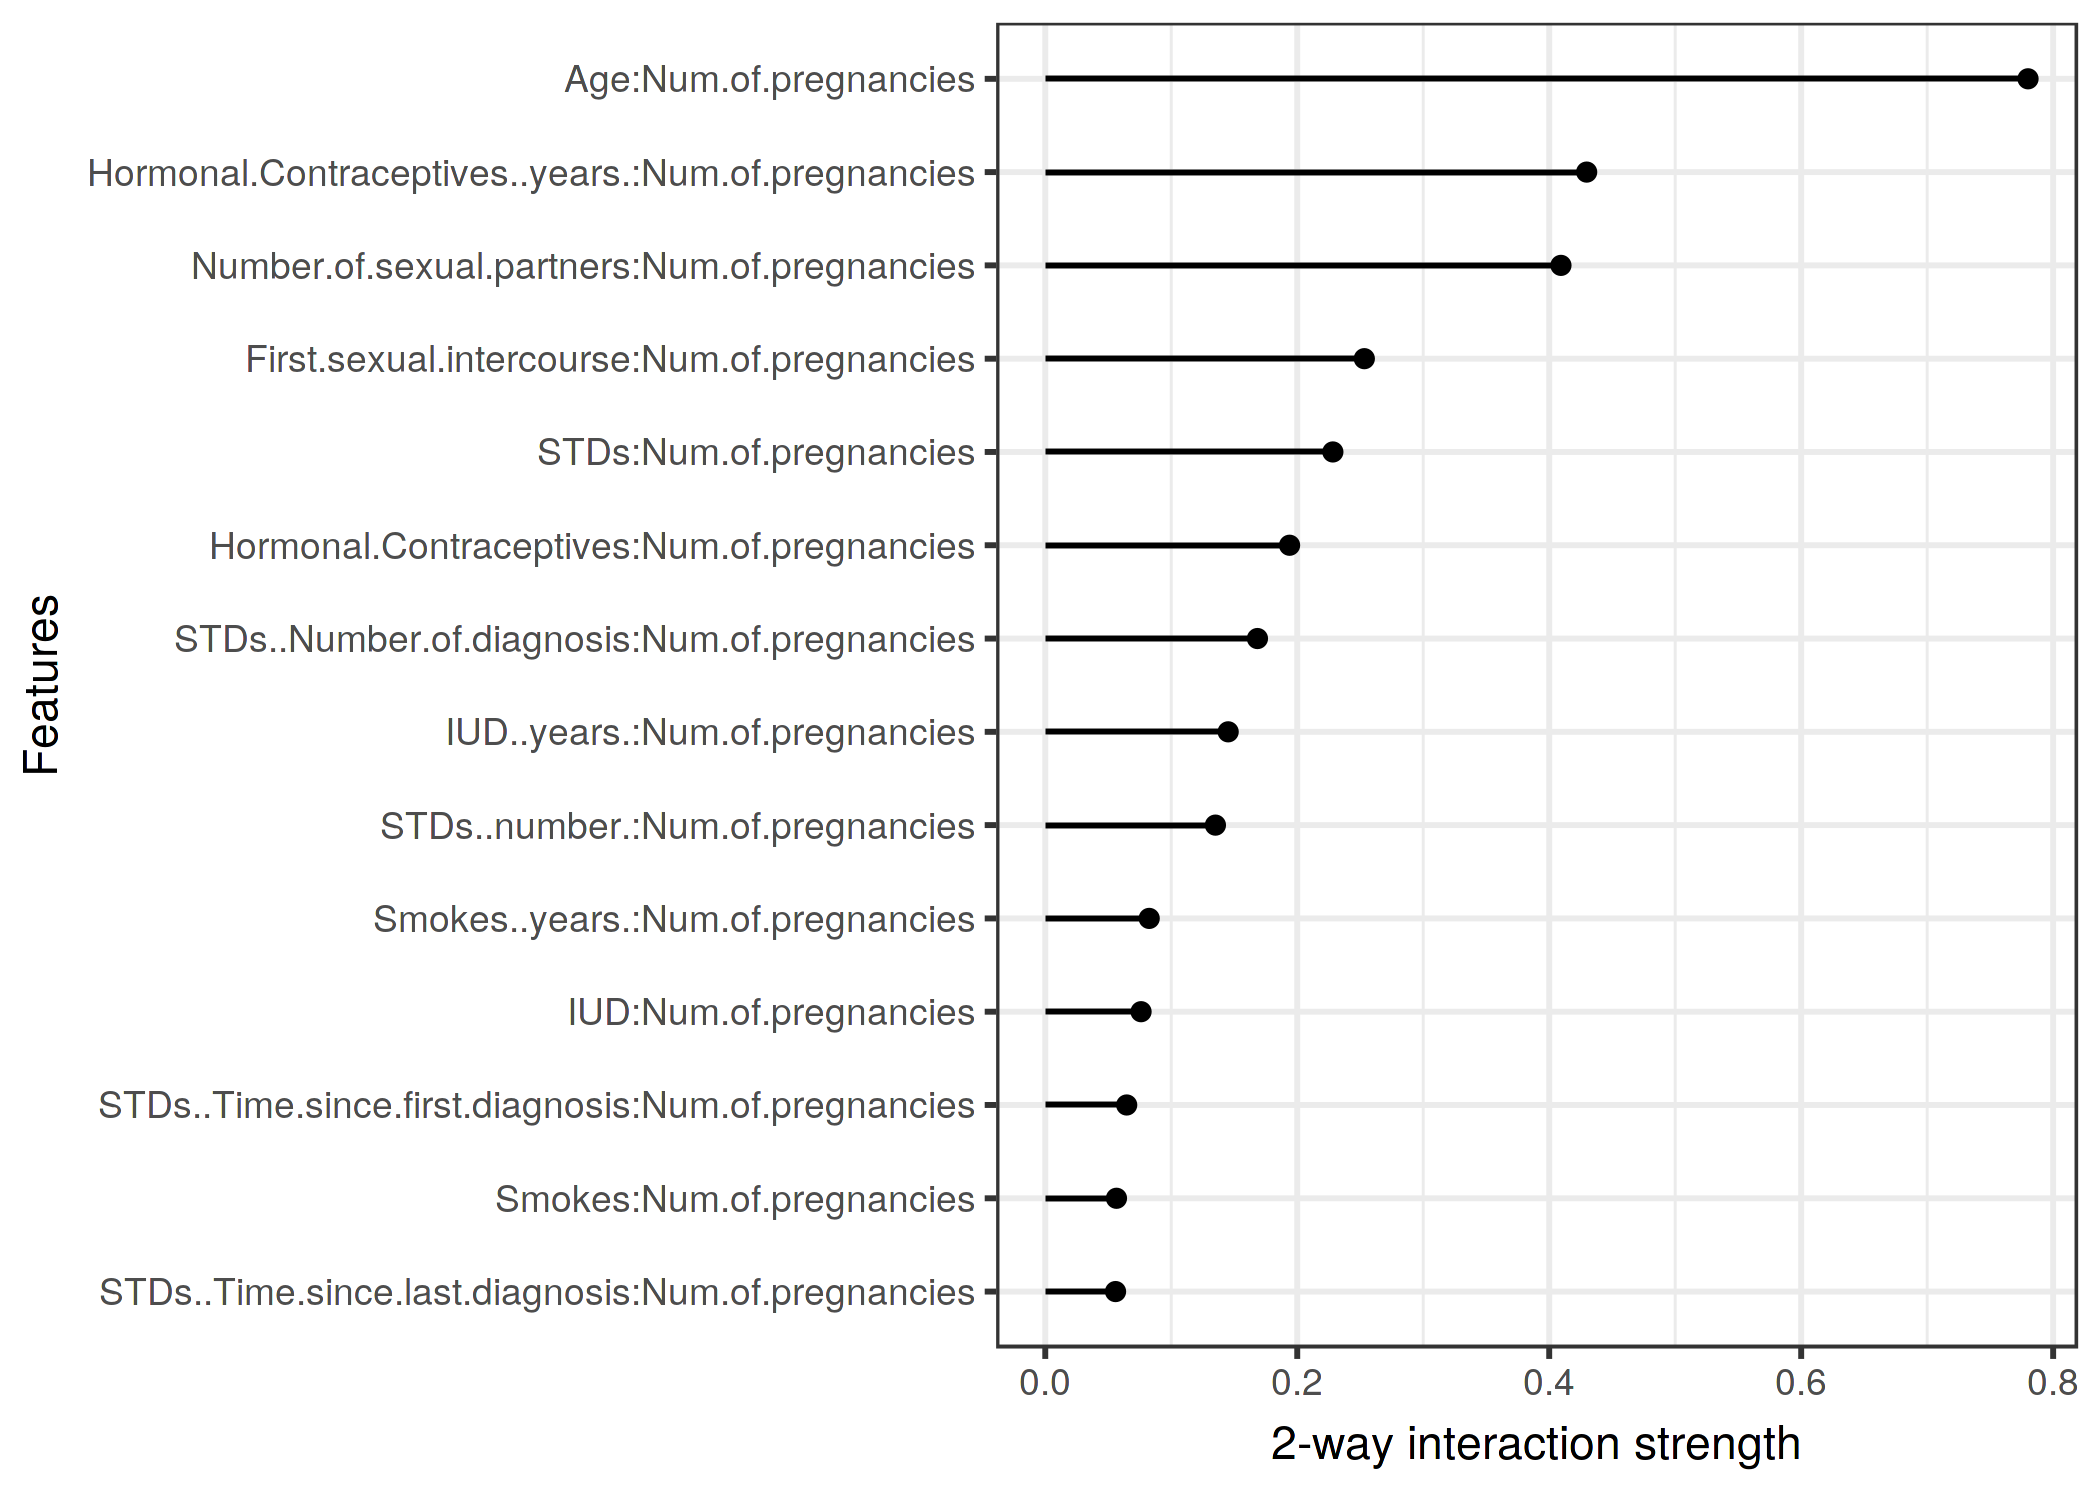 The 2-way interaction strengths (H-statistic) between number of pregnancies and each other feature. There is a strong interaction between the number of pregnancies and the age.